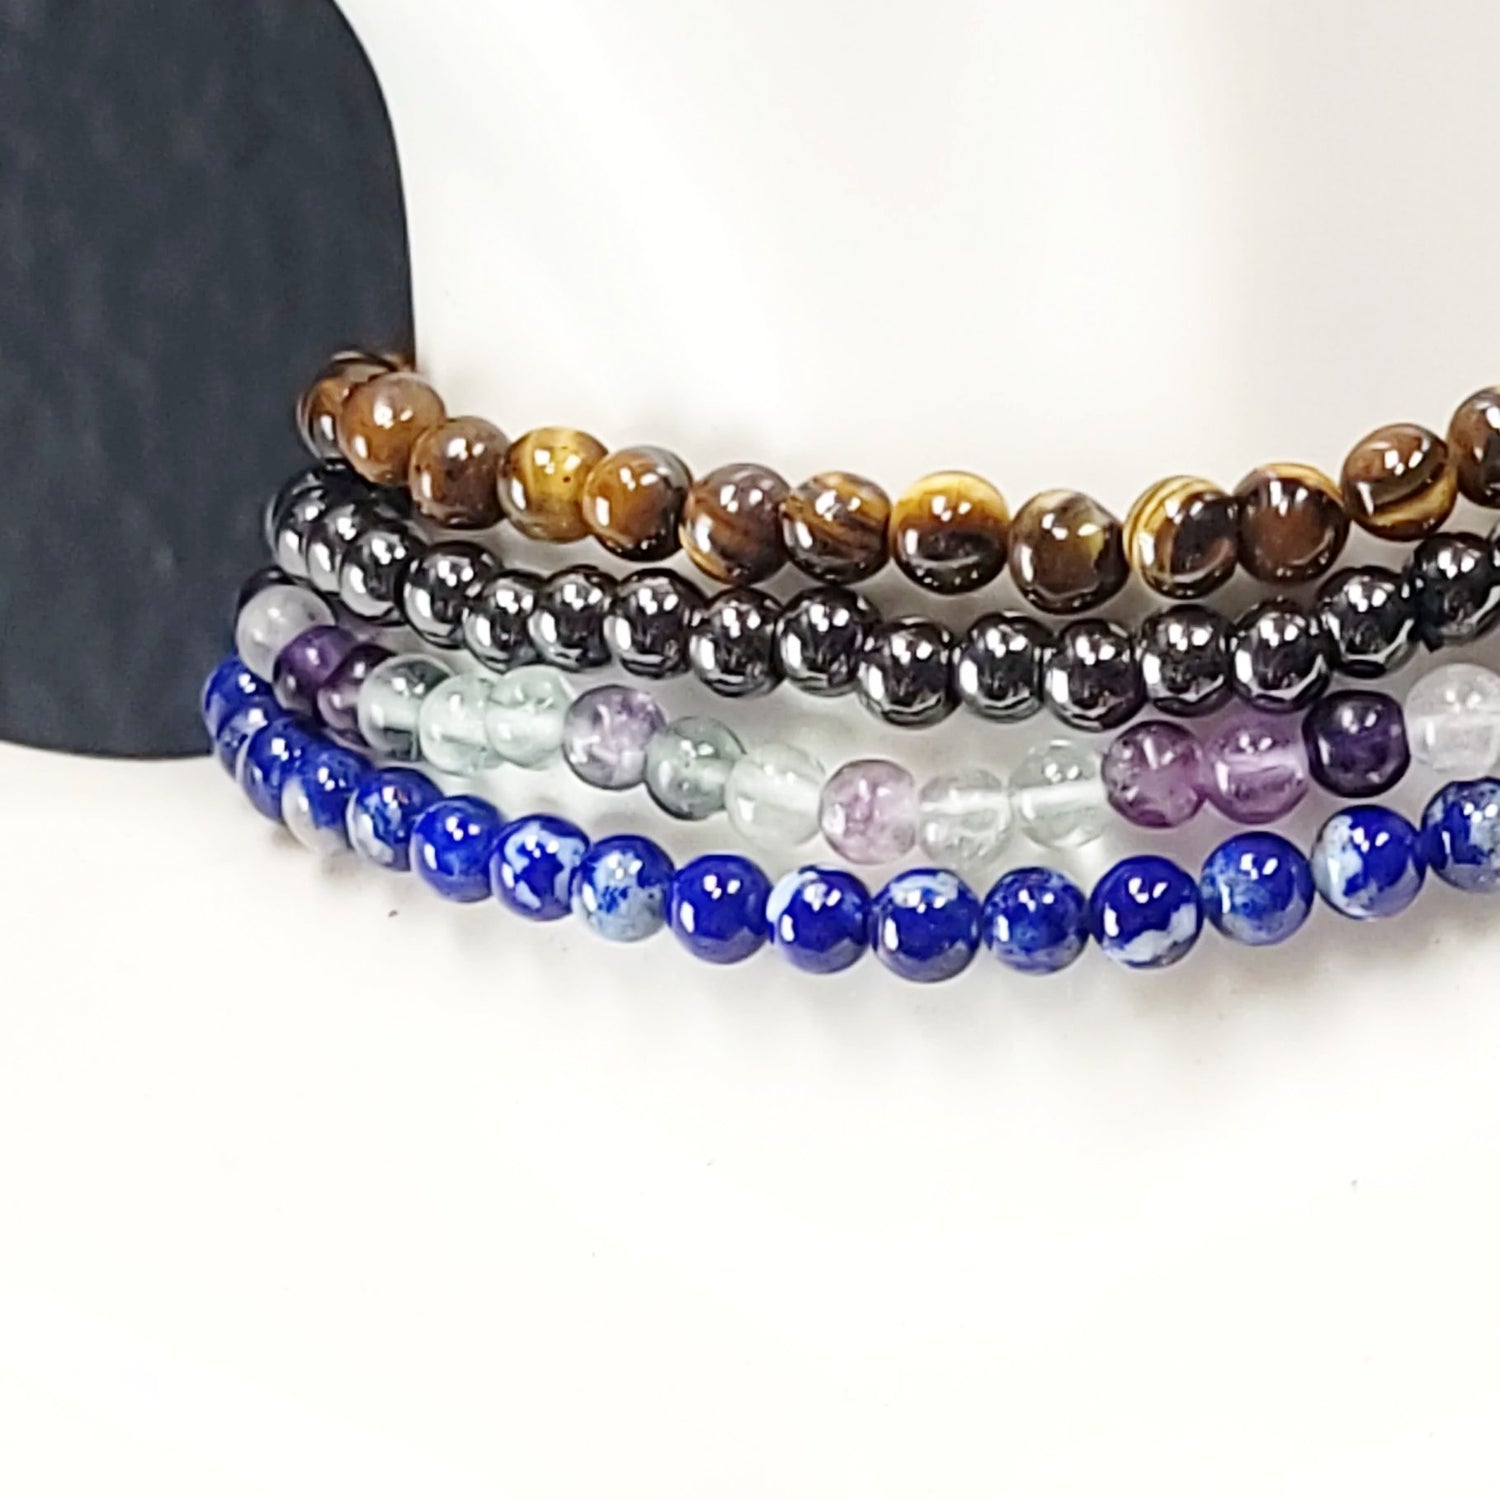 Worry About Yourself! - Focus Bracelet Set 4mm Bead Bracelet - Elevated Metaphysical